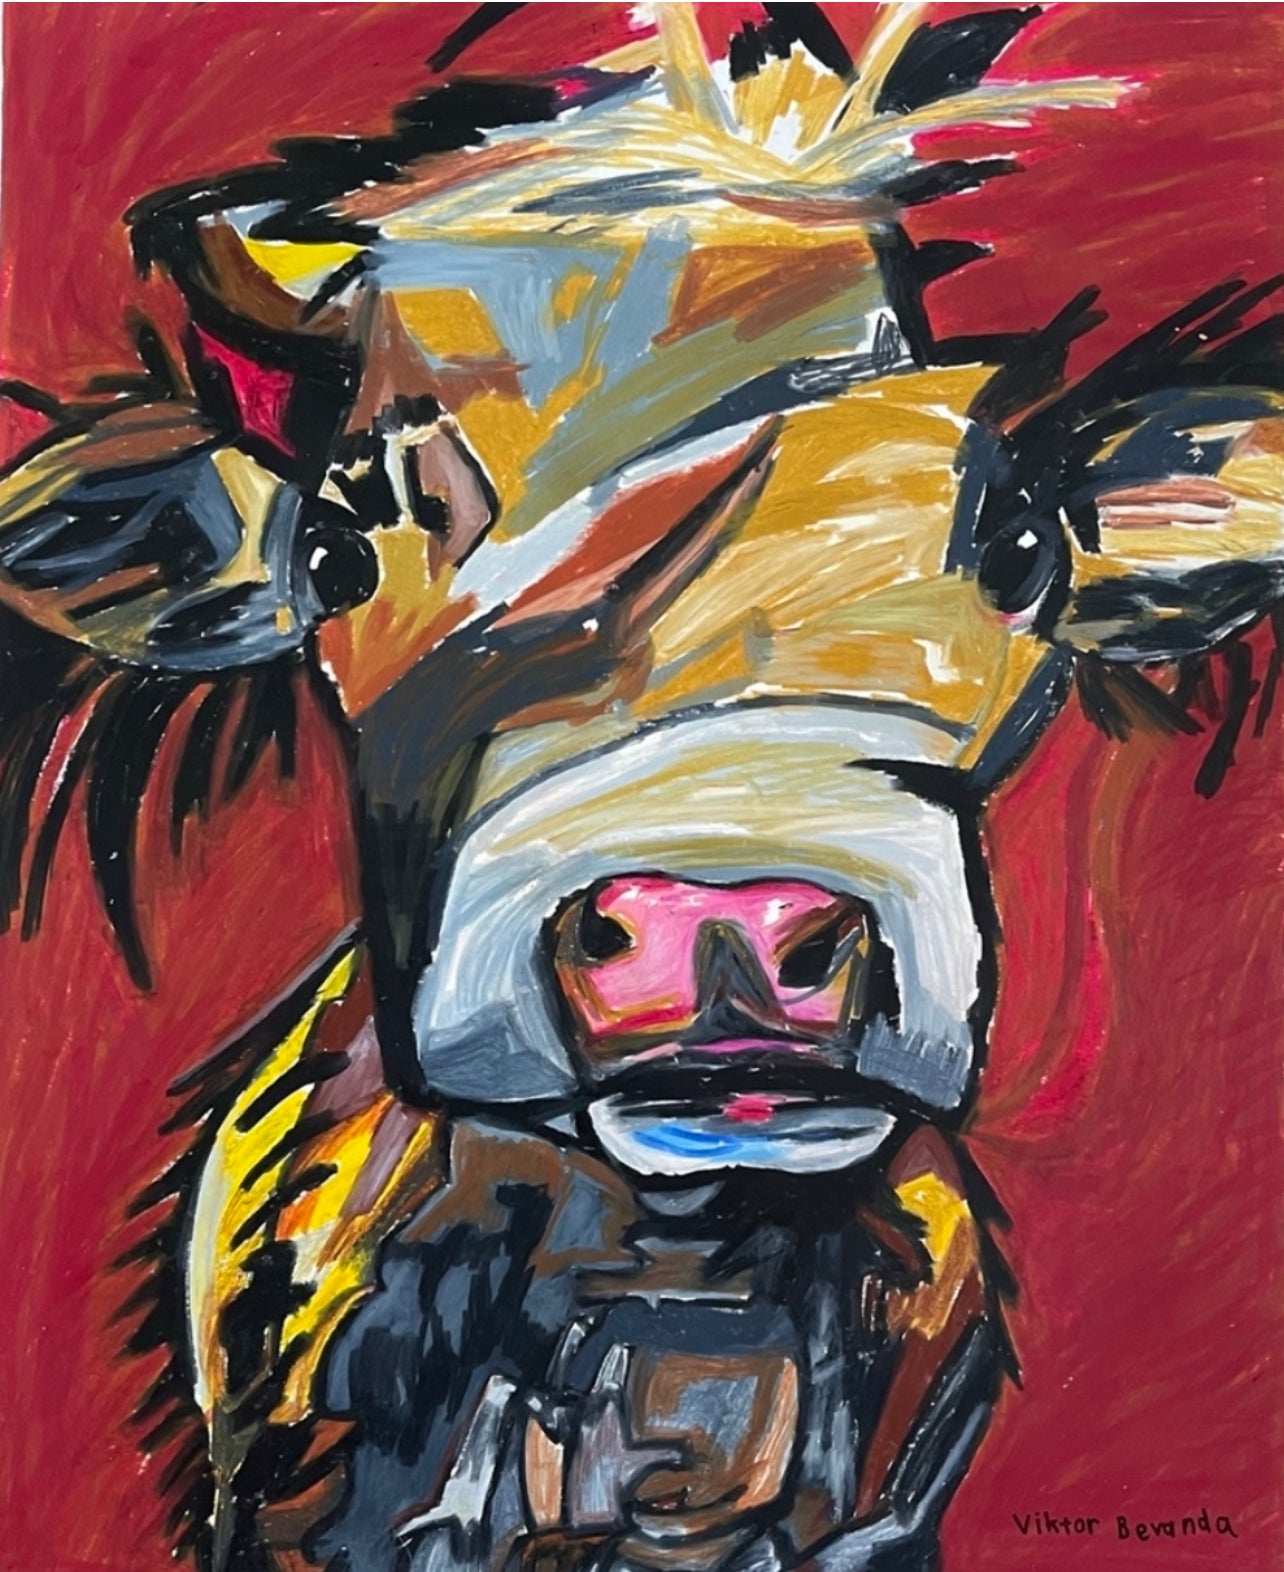 Cow - fine prints and canvas prints in more sizes